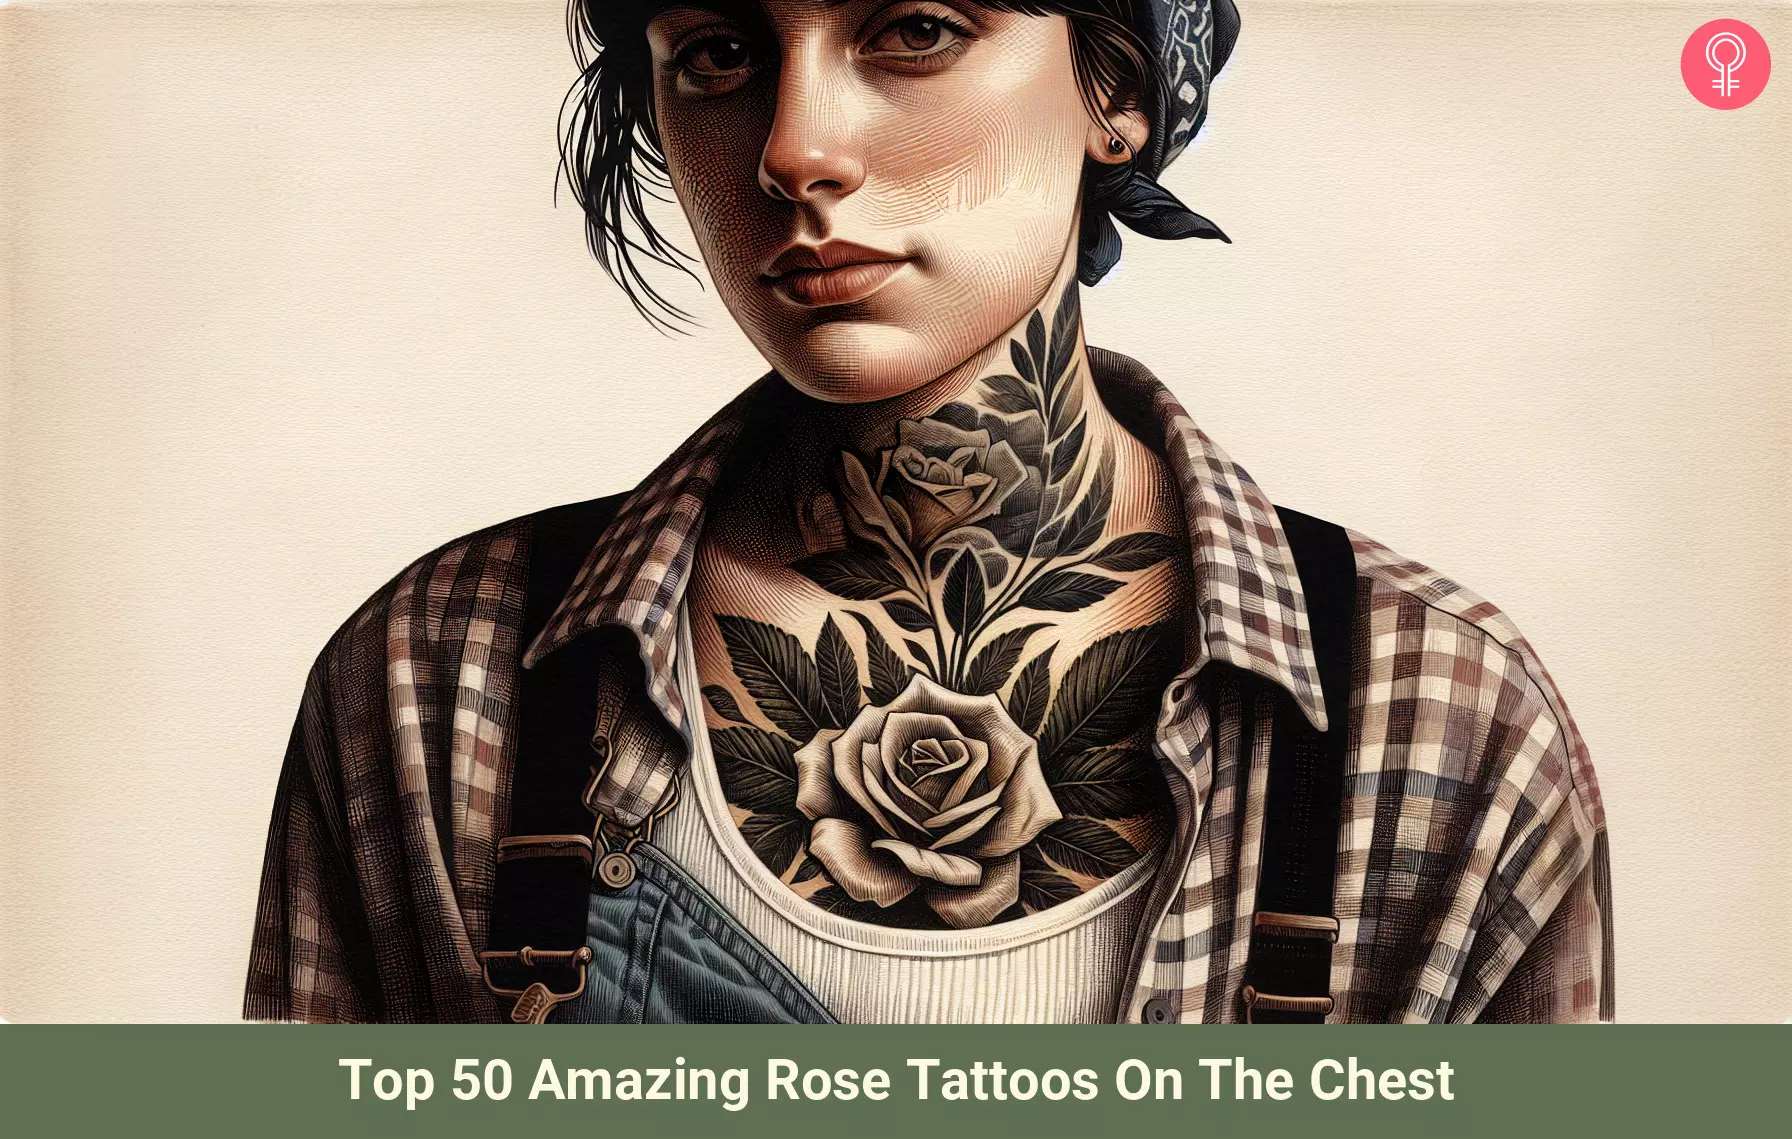 Top 50 Amazing Rose Tattoos On The Chest